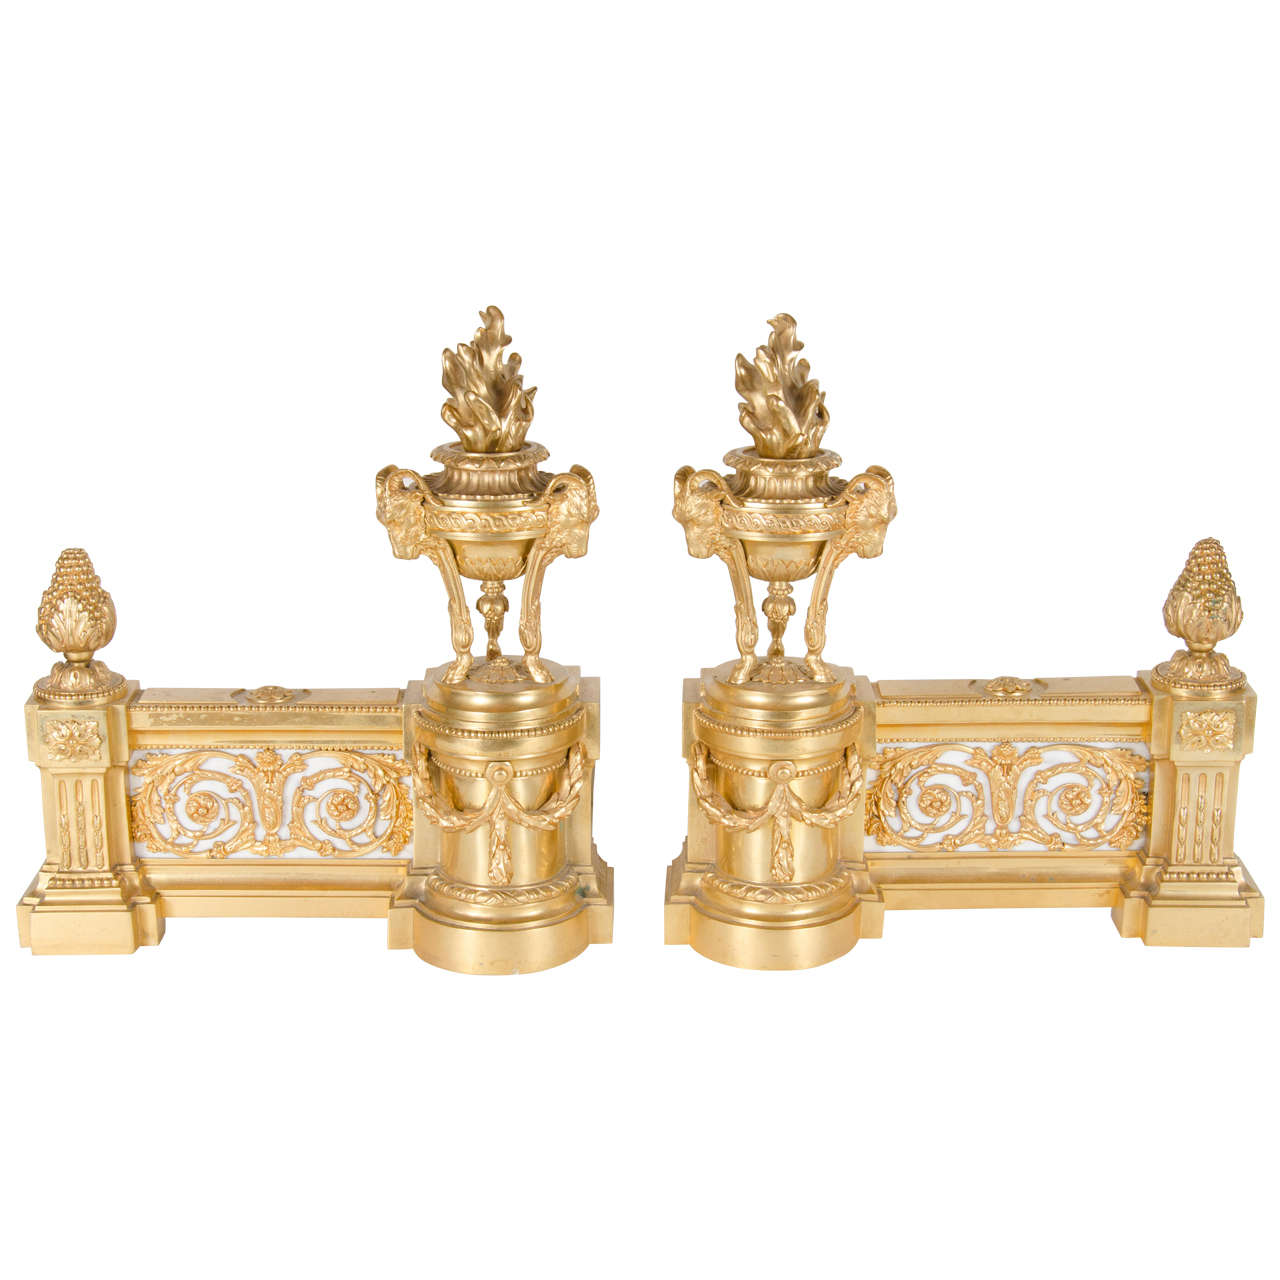 19th Century Pair of French Bronze Doré Chenets or Andirons